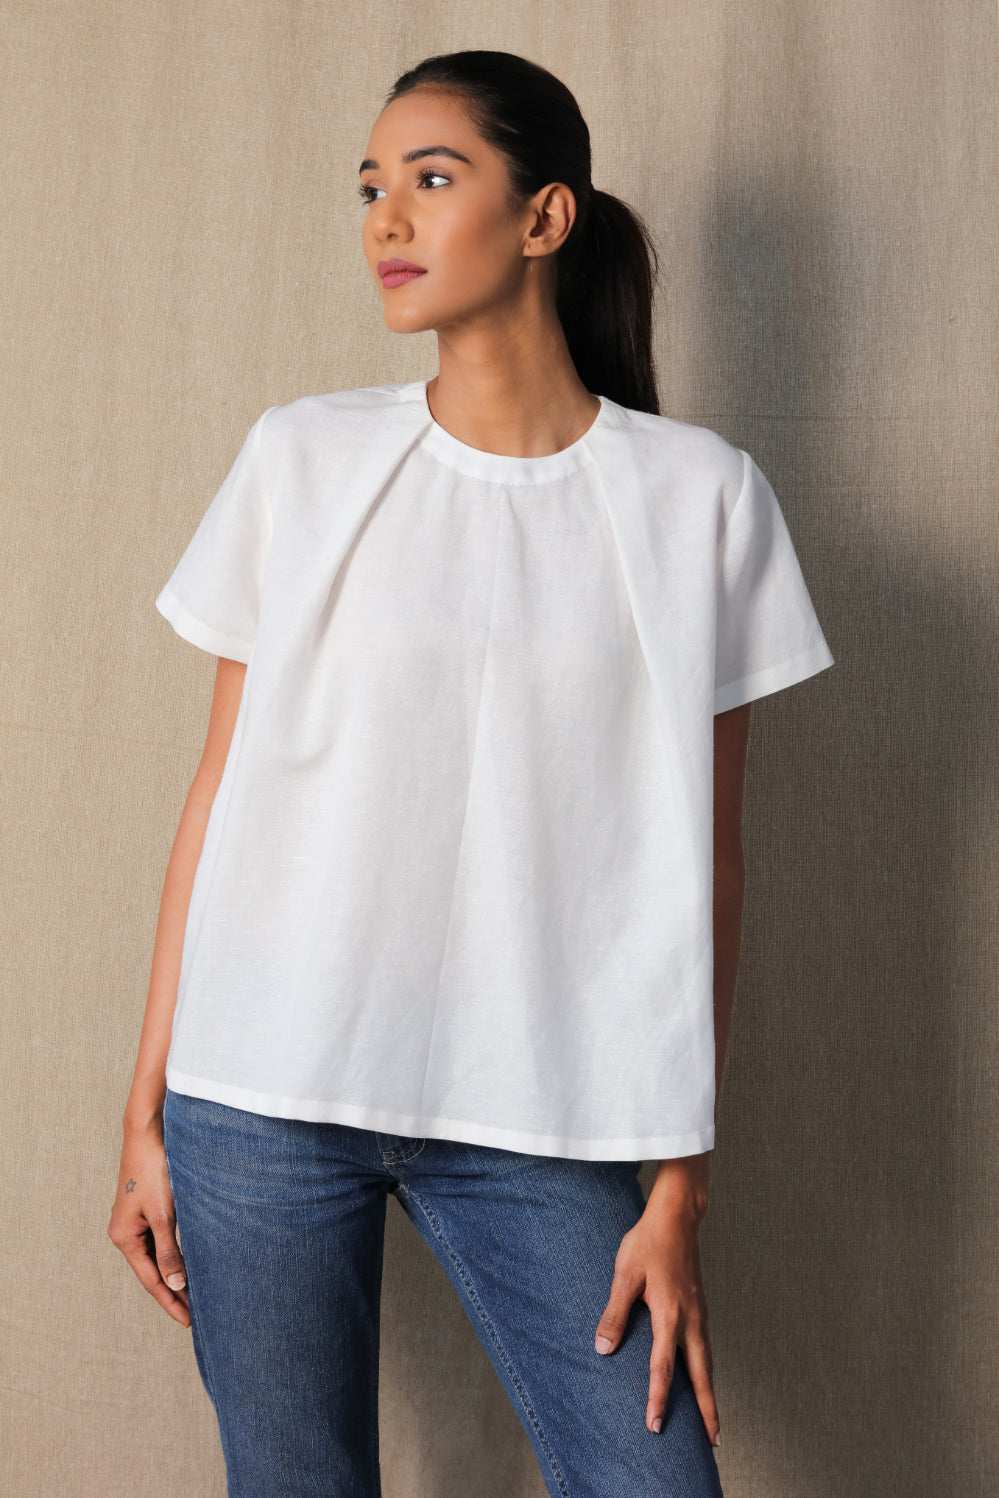 White pleated top